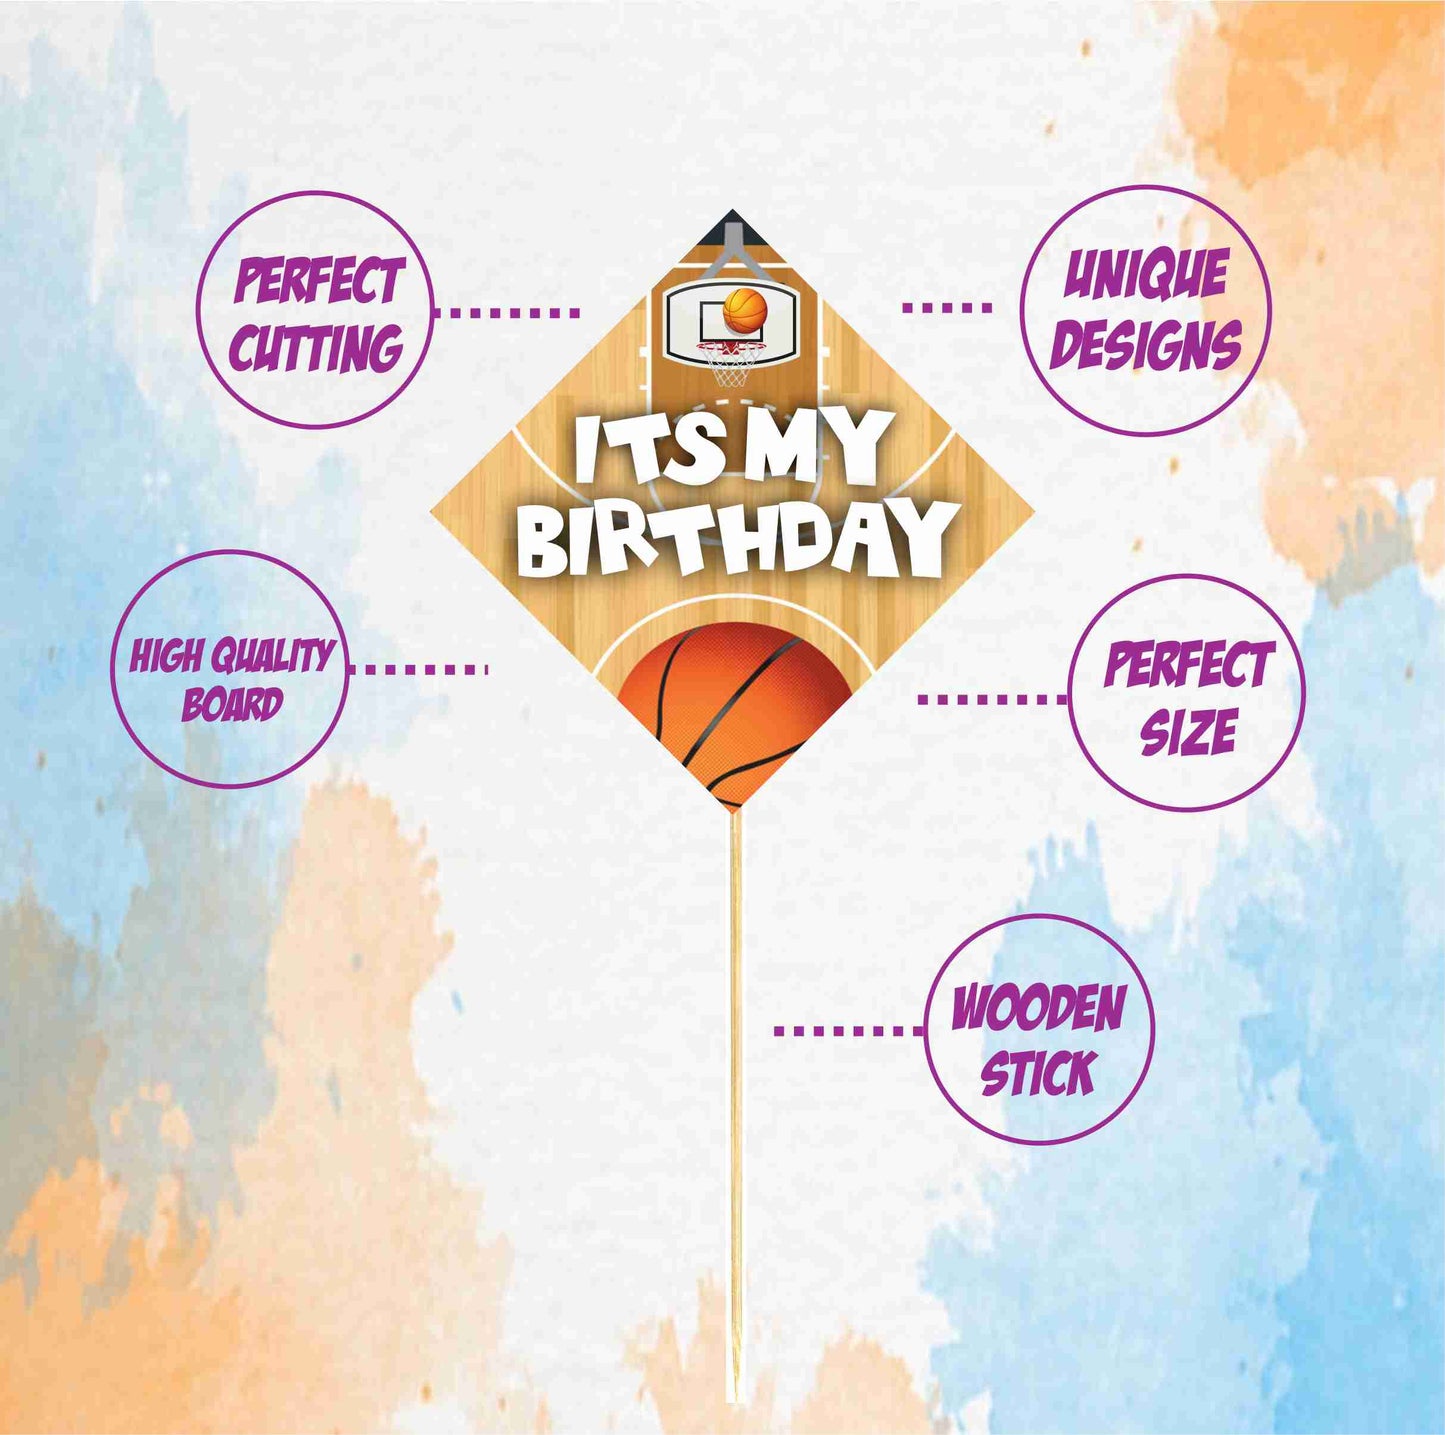 Basket Ball Theme Cake Topper Pack of 10 Nos for Birthday Cake Decoration Theme Party Item For Boys Girls Adults Birthday Theme Decor